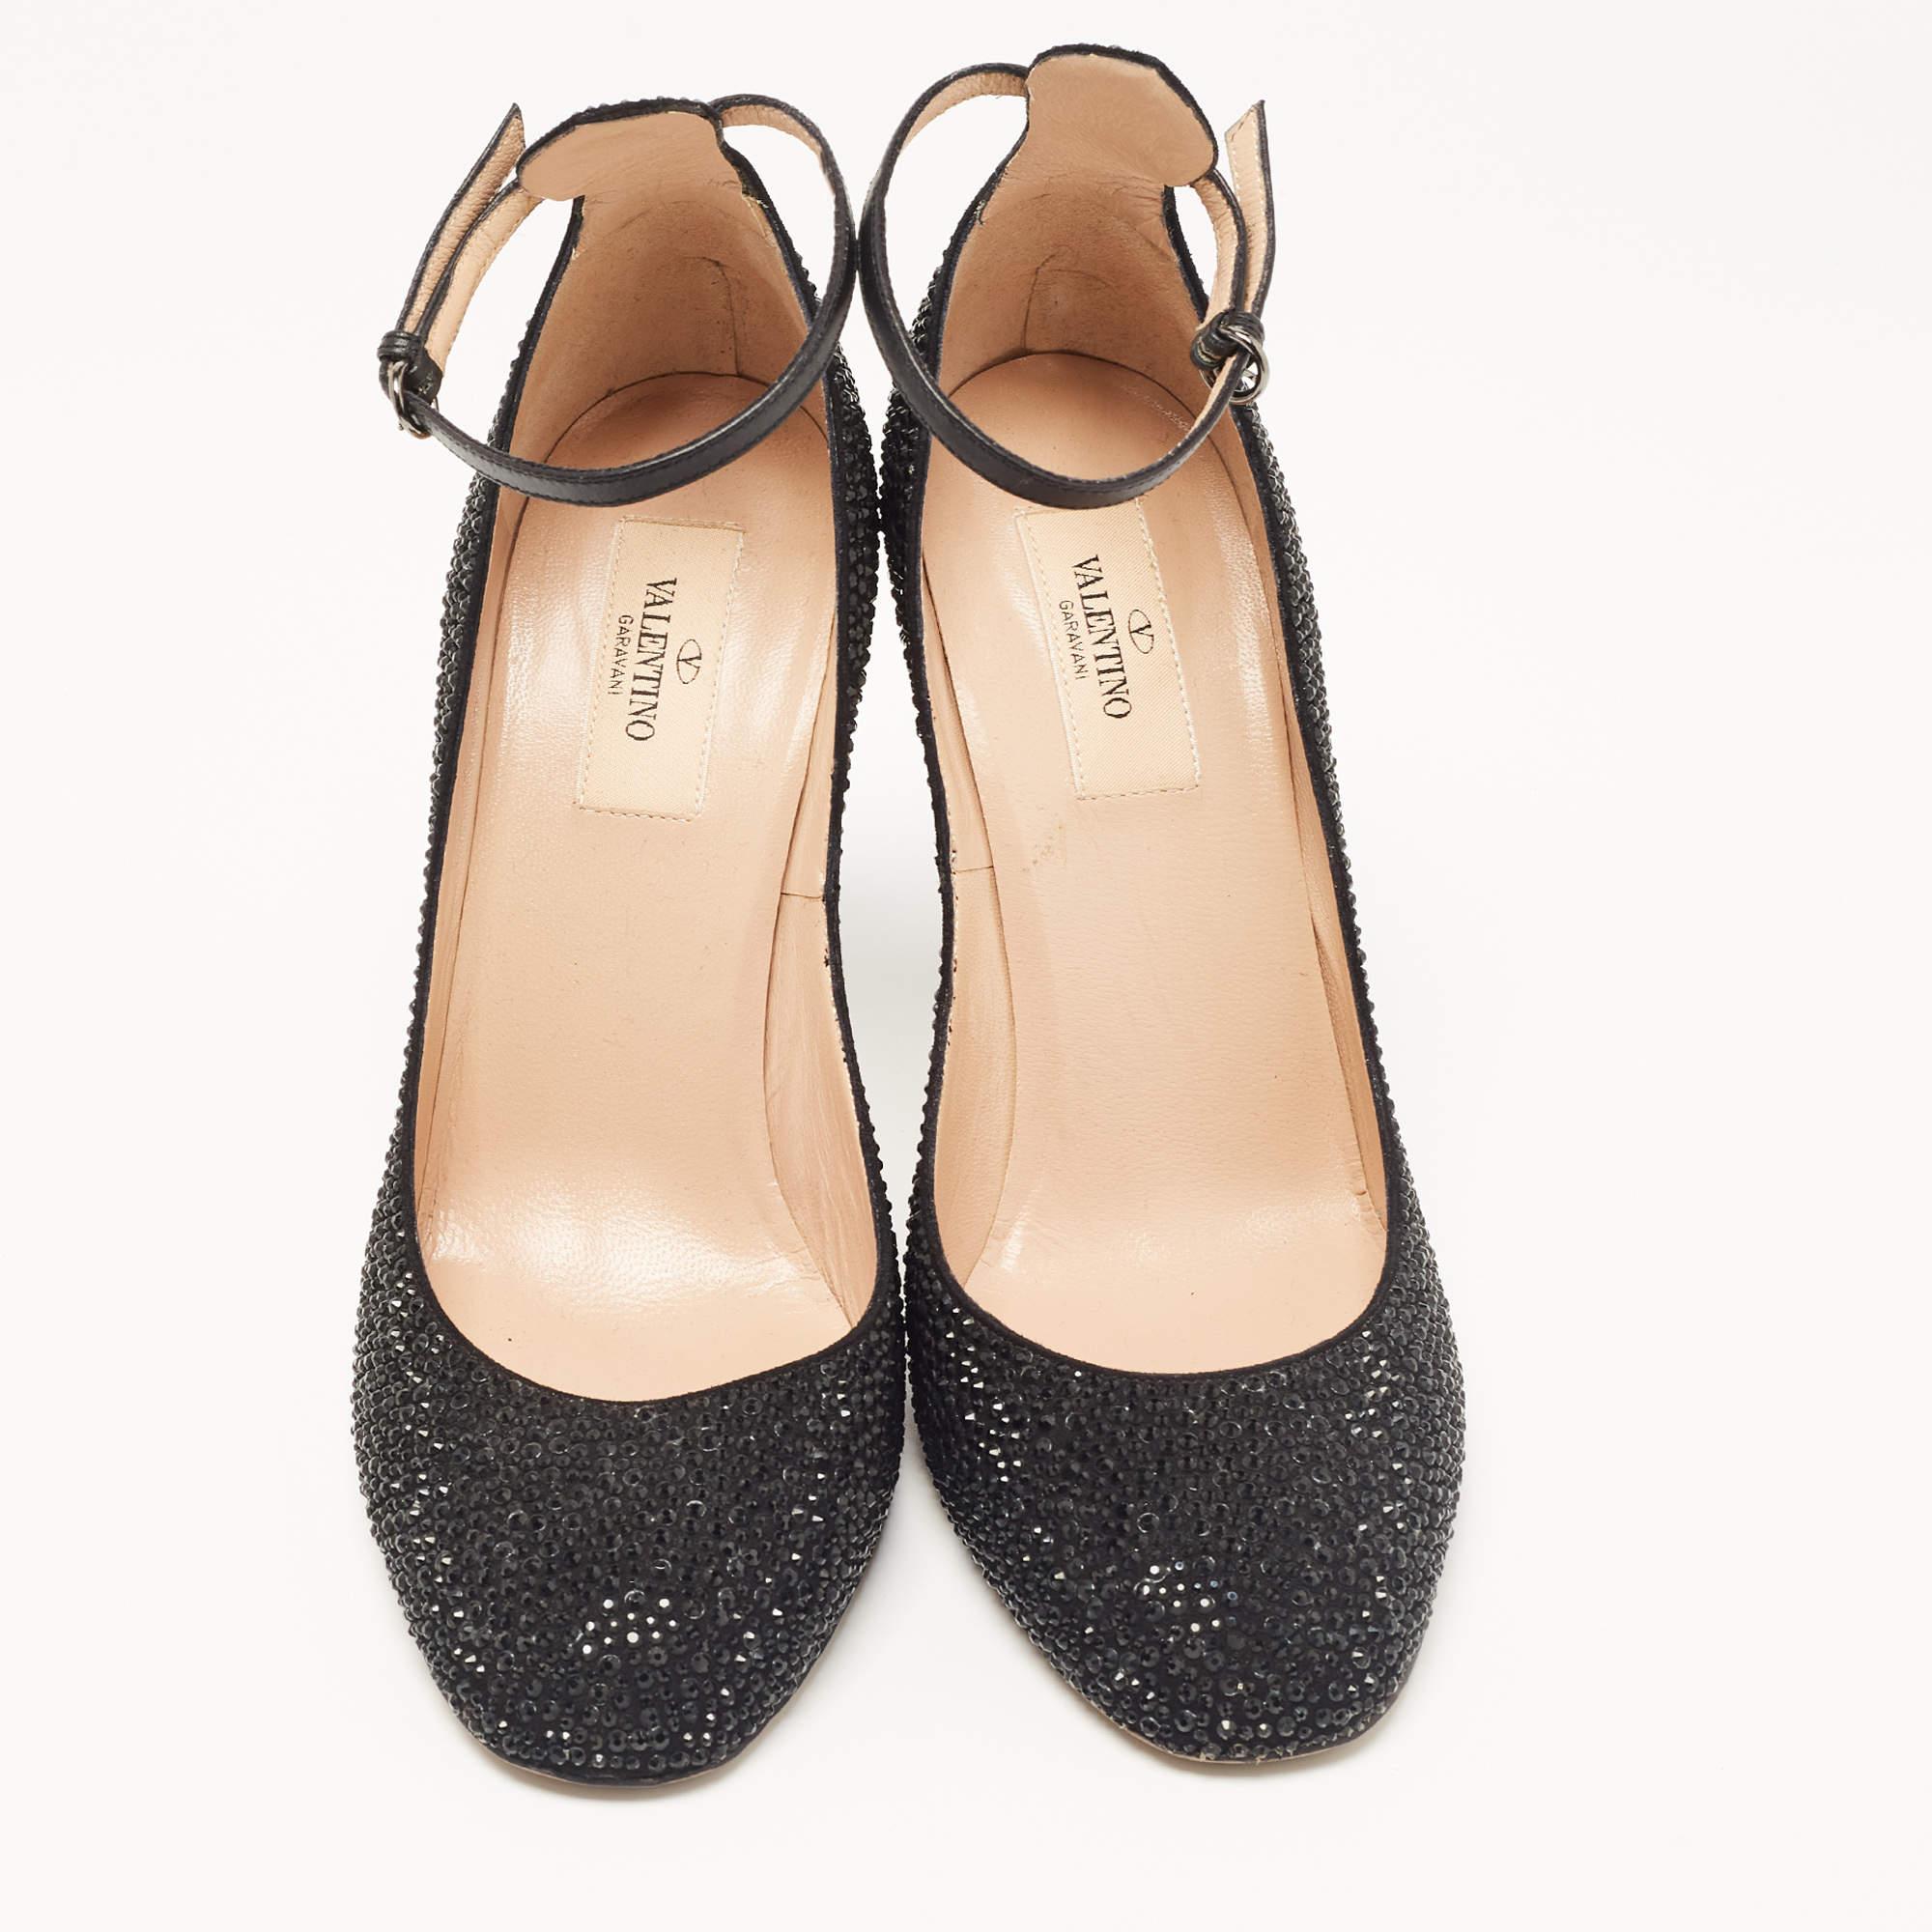 Women's Valentino Black Leather Crystal Embellished Tango Pumps Size 39